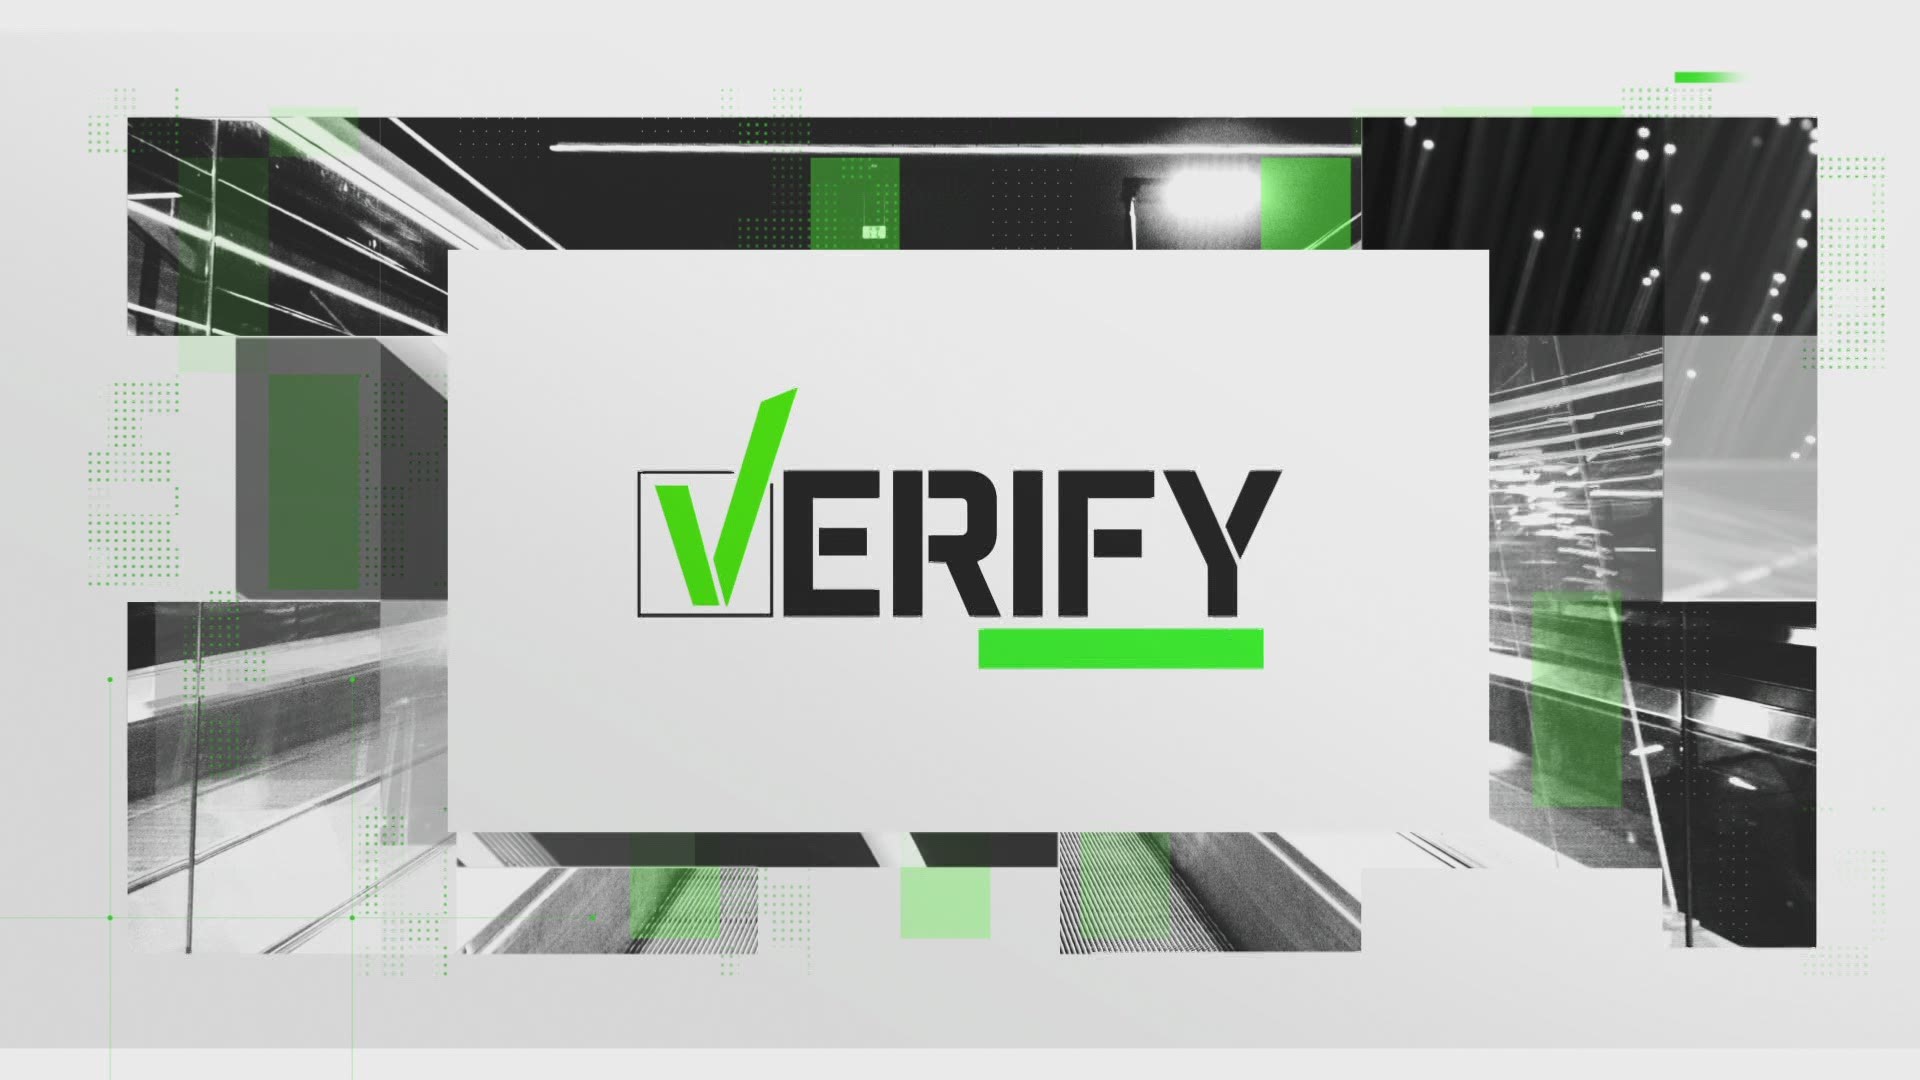 Our VERIFY team checked it out.